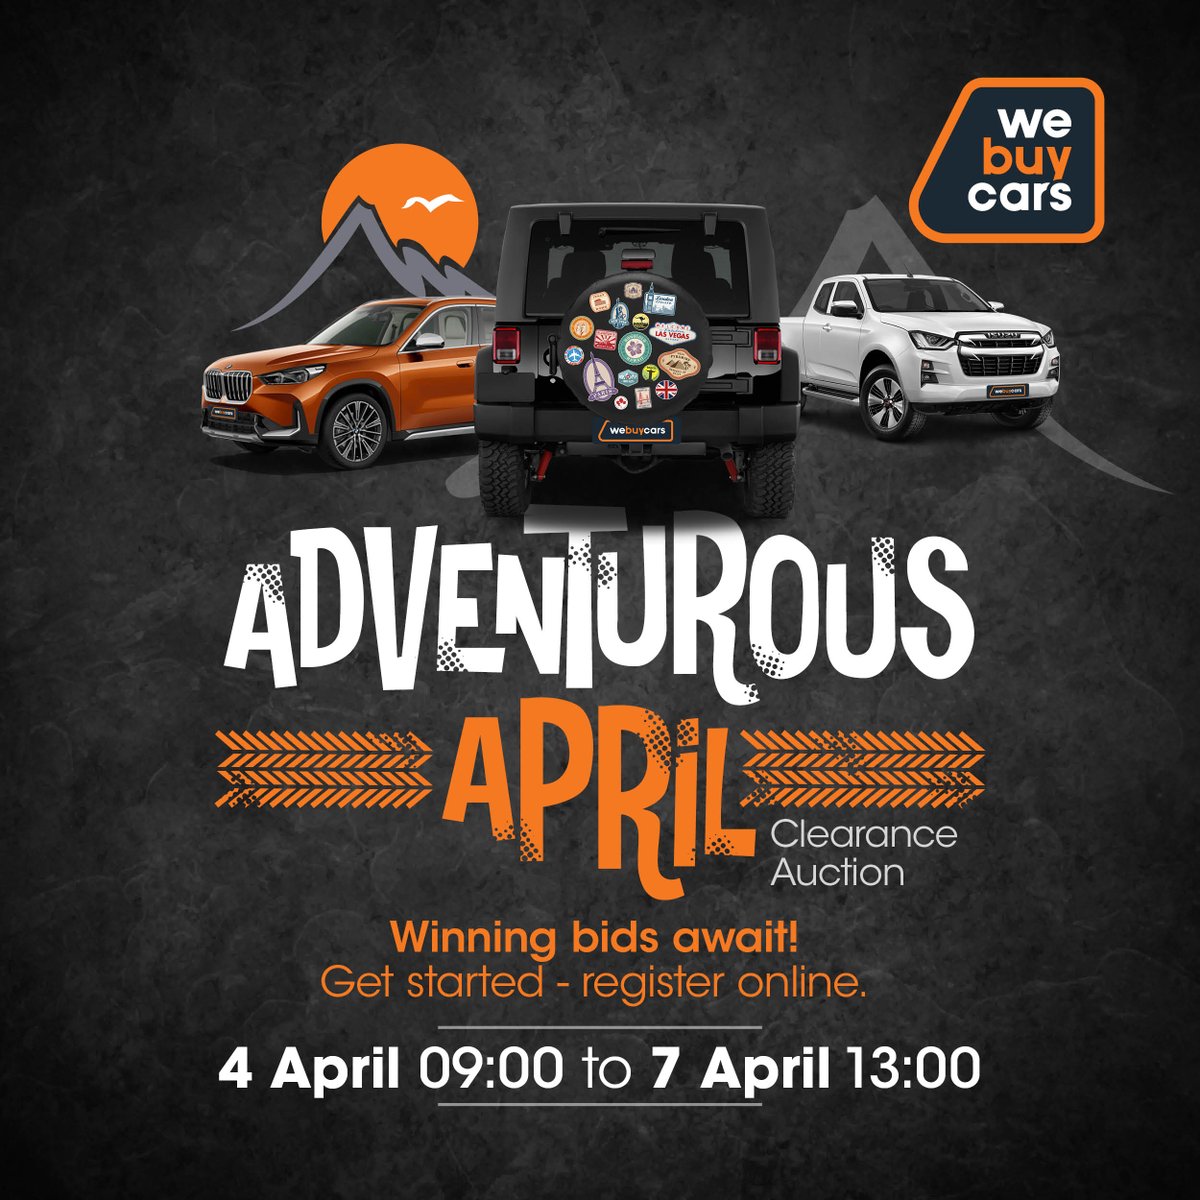 Be more adventurous this April! Register to bid online and make your car dreams come true with #WeBuyCars. ⛰️